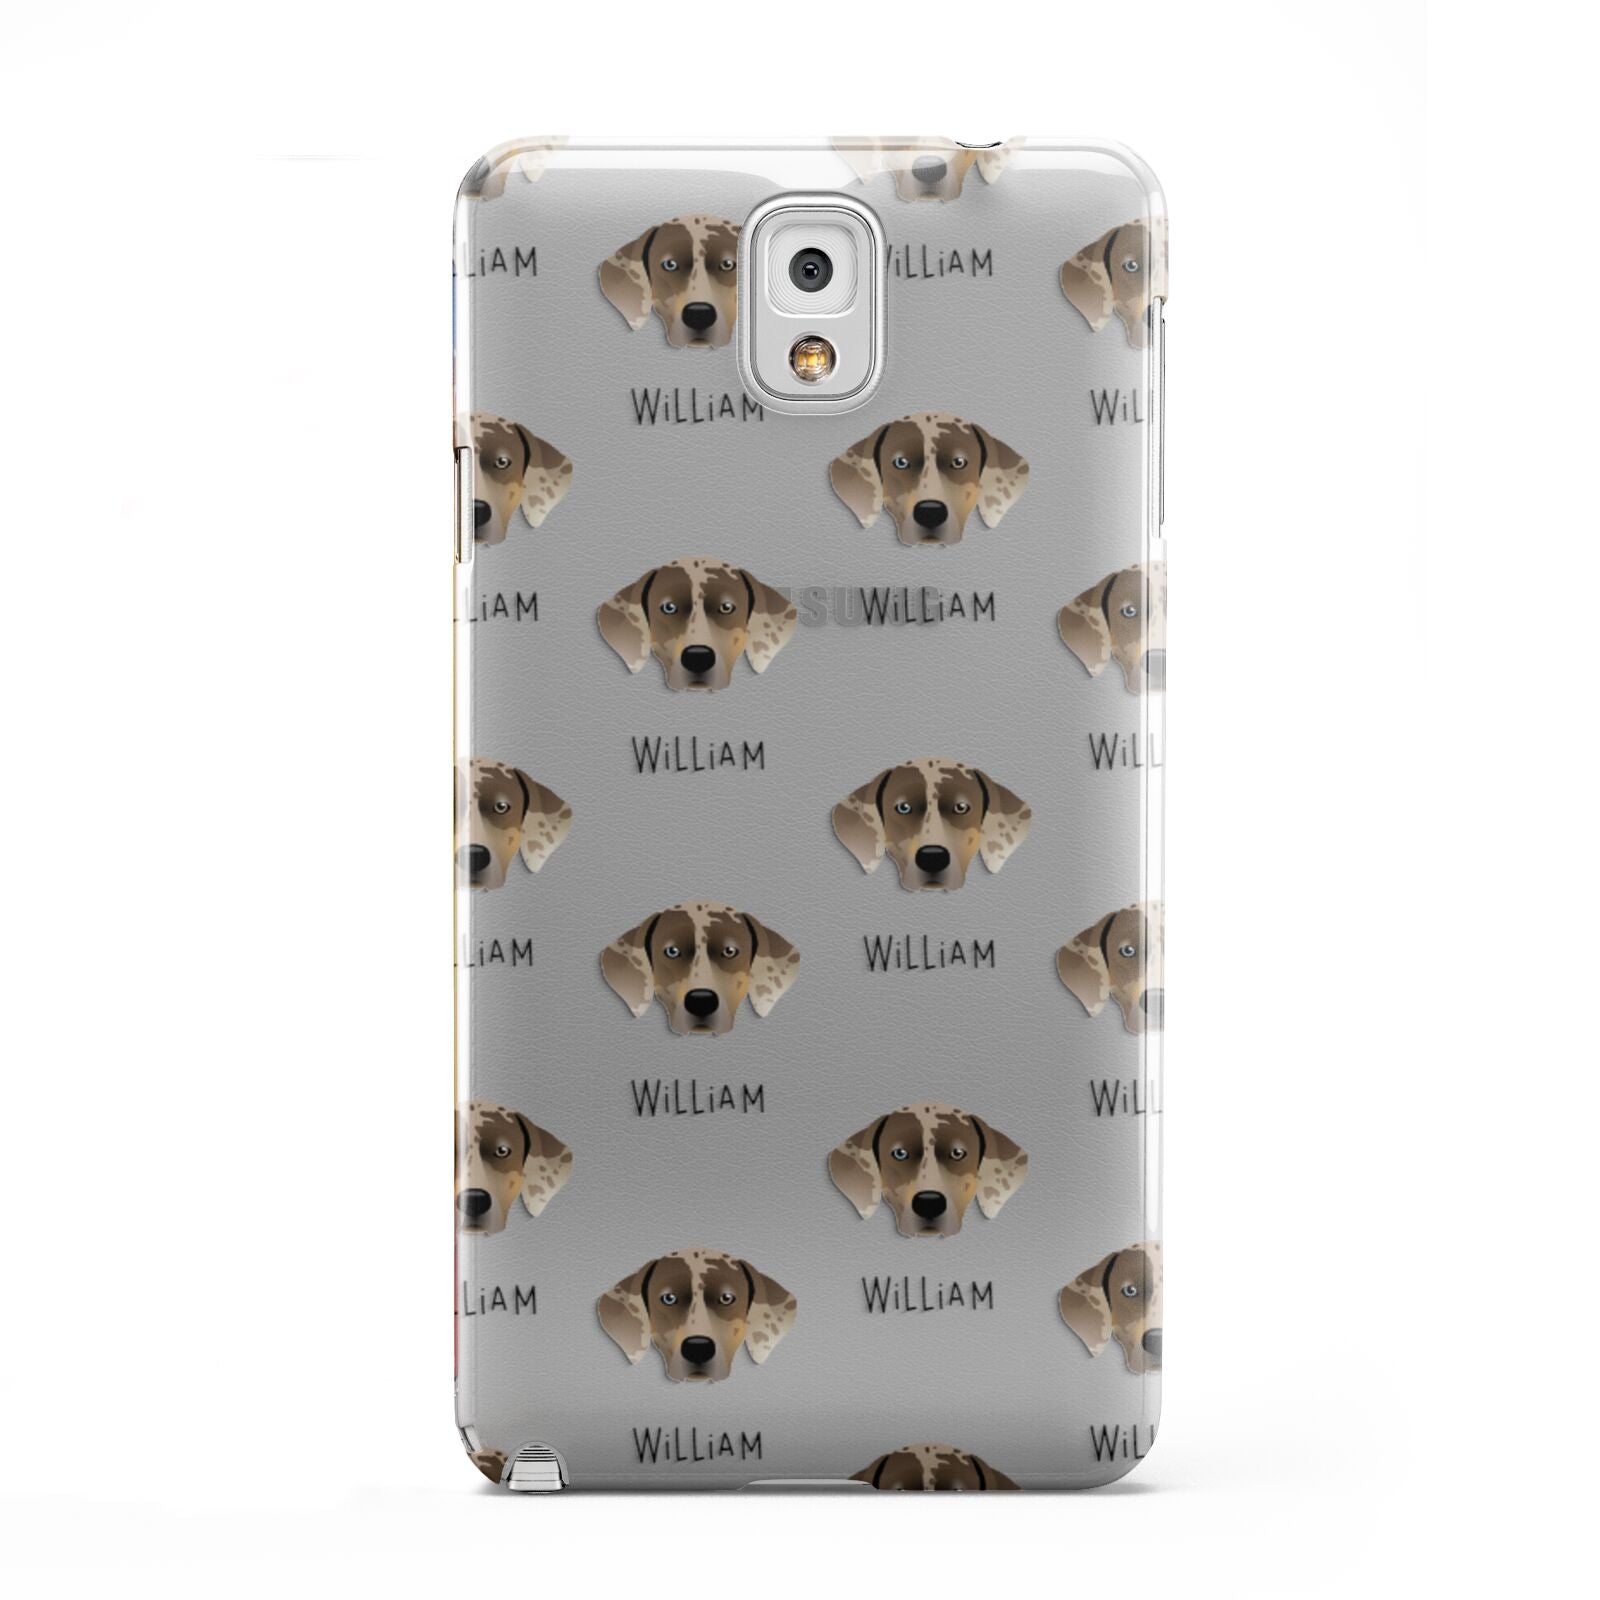 Catahoula Leopard Dog Icon with Name Samsung Galaxy Note 3 Case